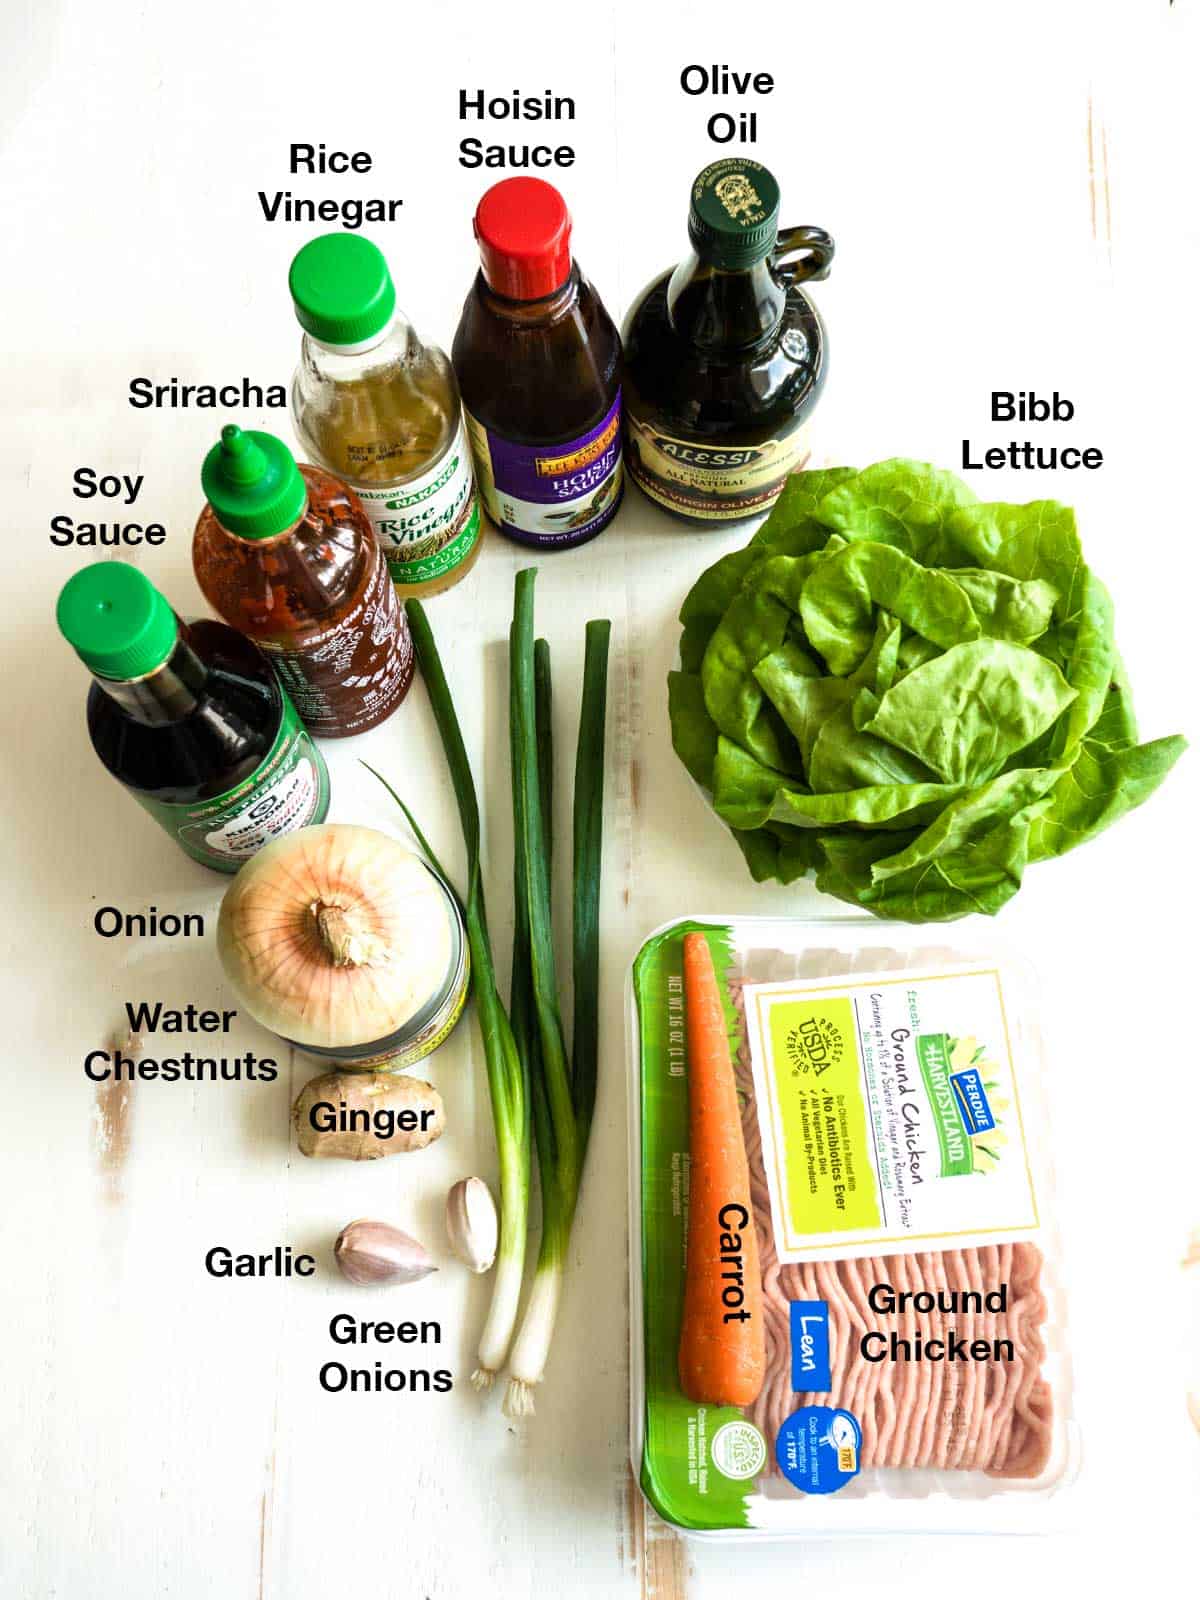 Ingredients for Asian Chicken Lettuce Wraps.